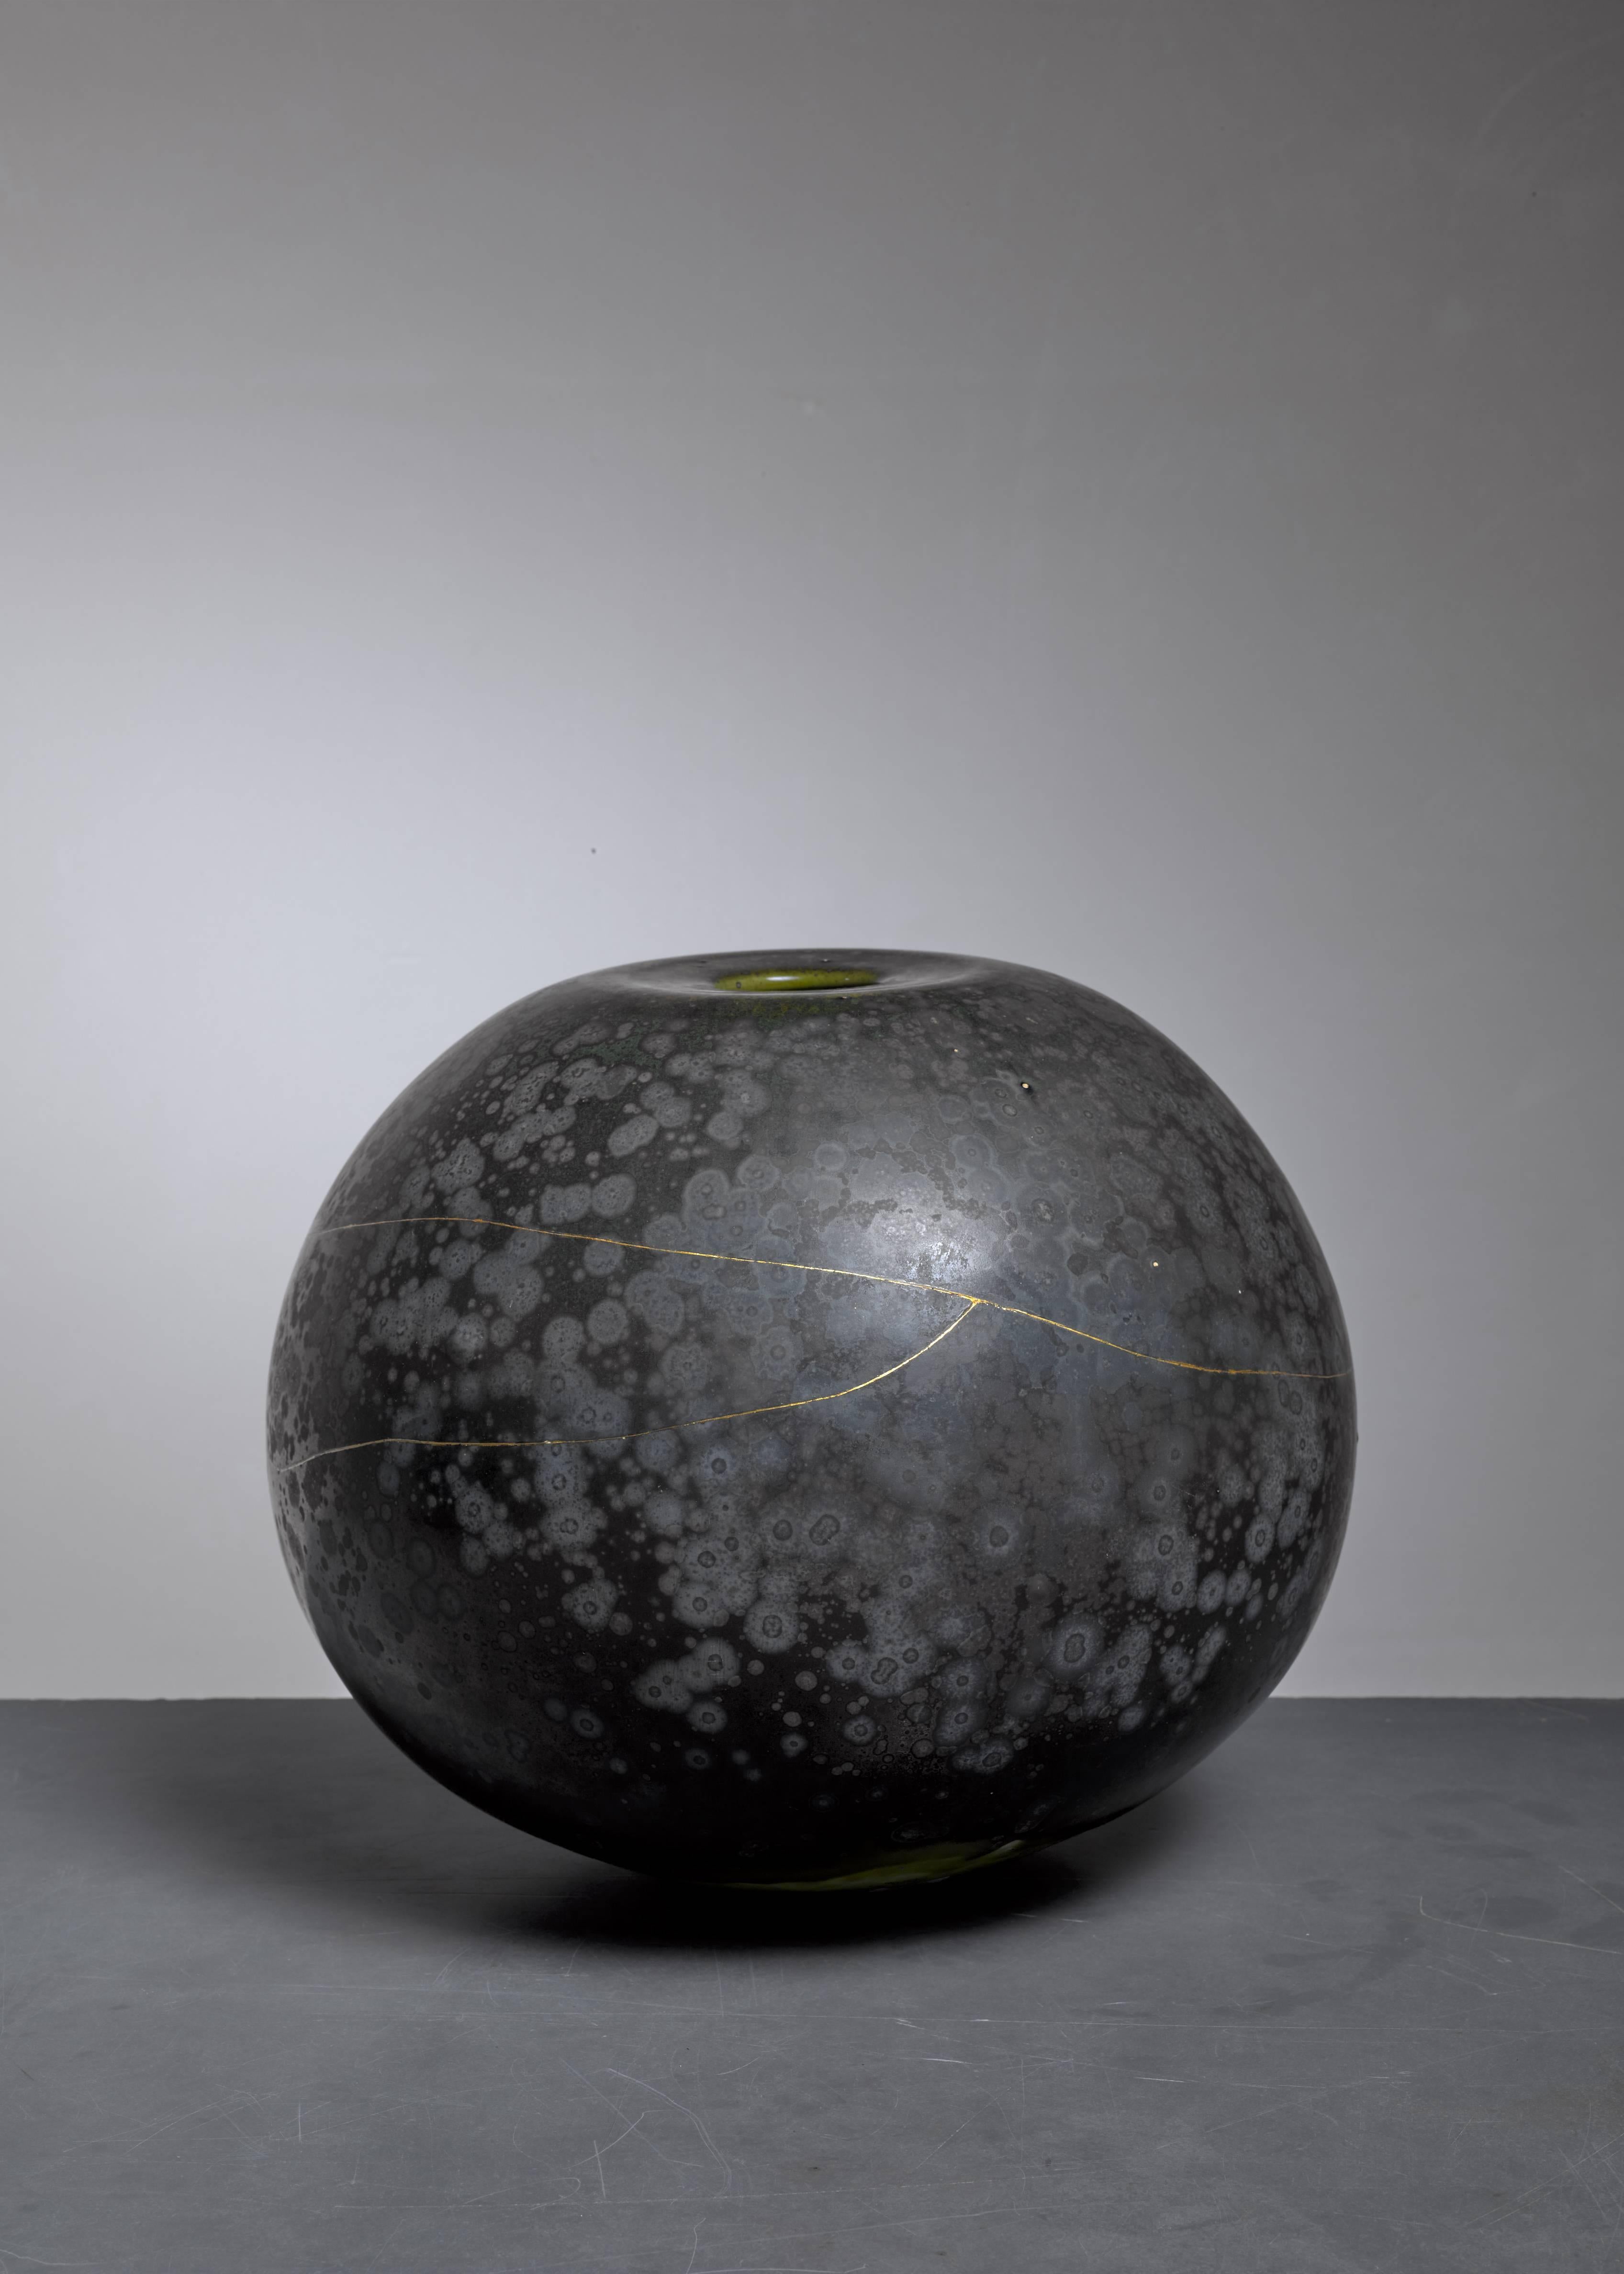 A large ceramic vase by German ceramist Willi Hornberger (1932-1995).

The vase has a black crystalline glaze finish and was treated with the Kintsugi technique. With this treatment, also known as the Japanese repair, a broken vase is fixed with